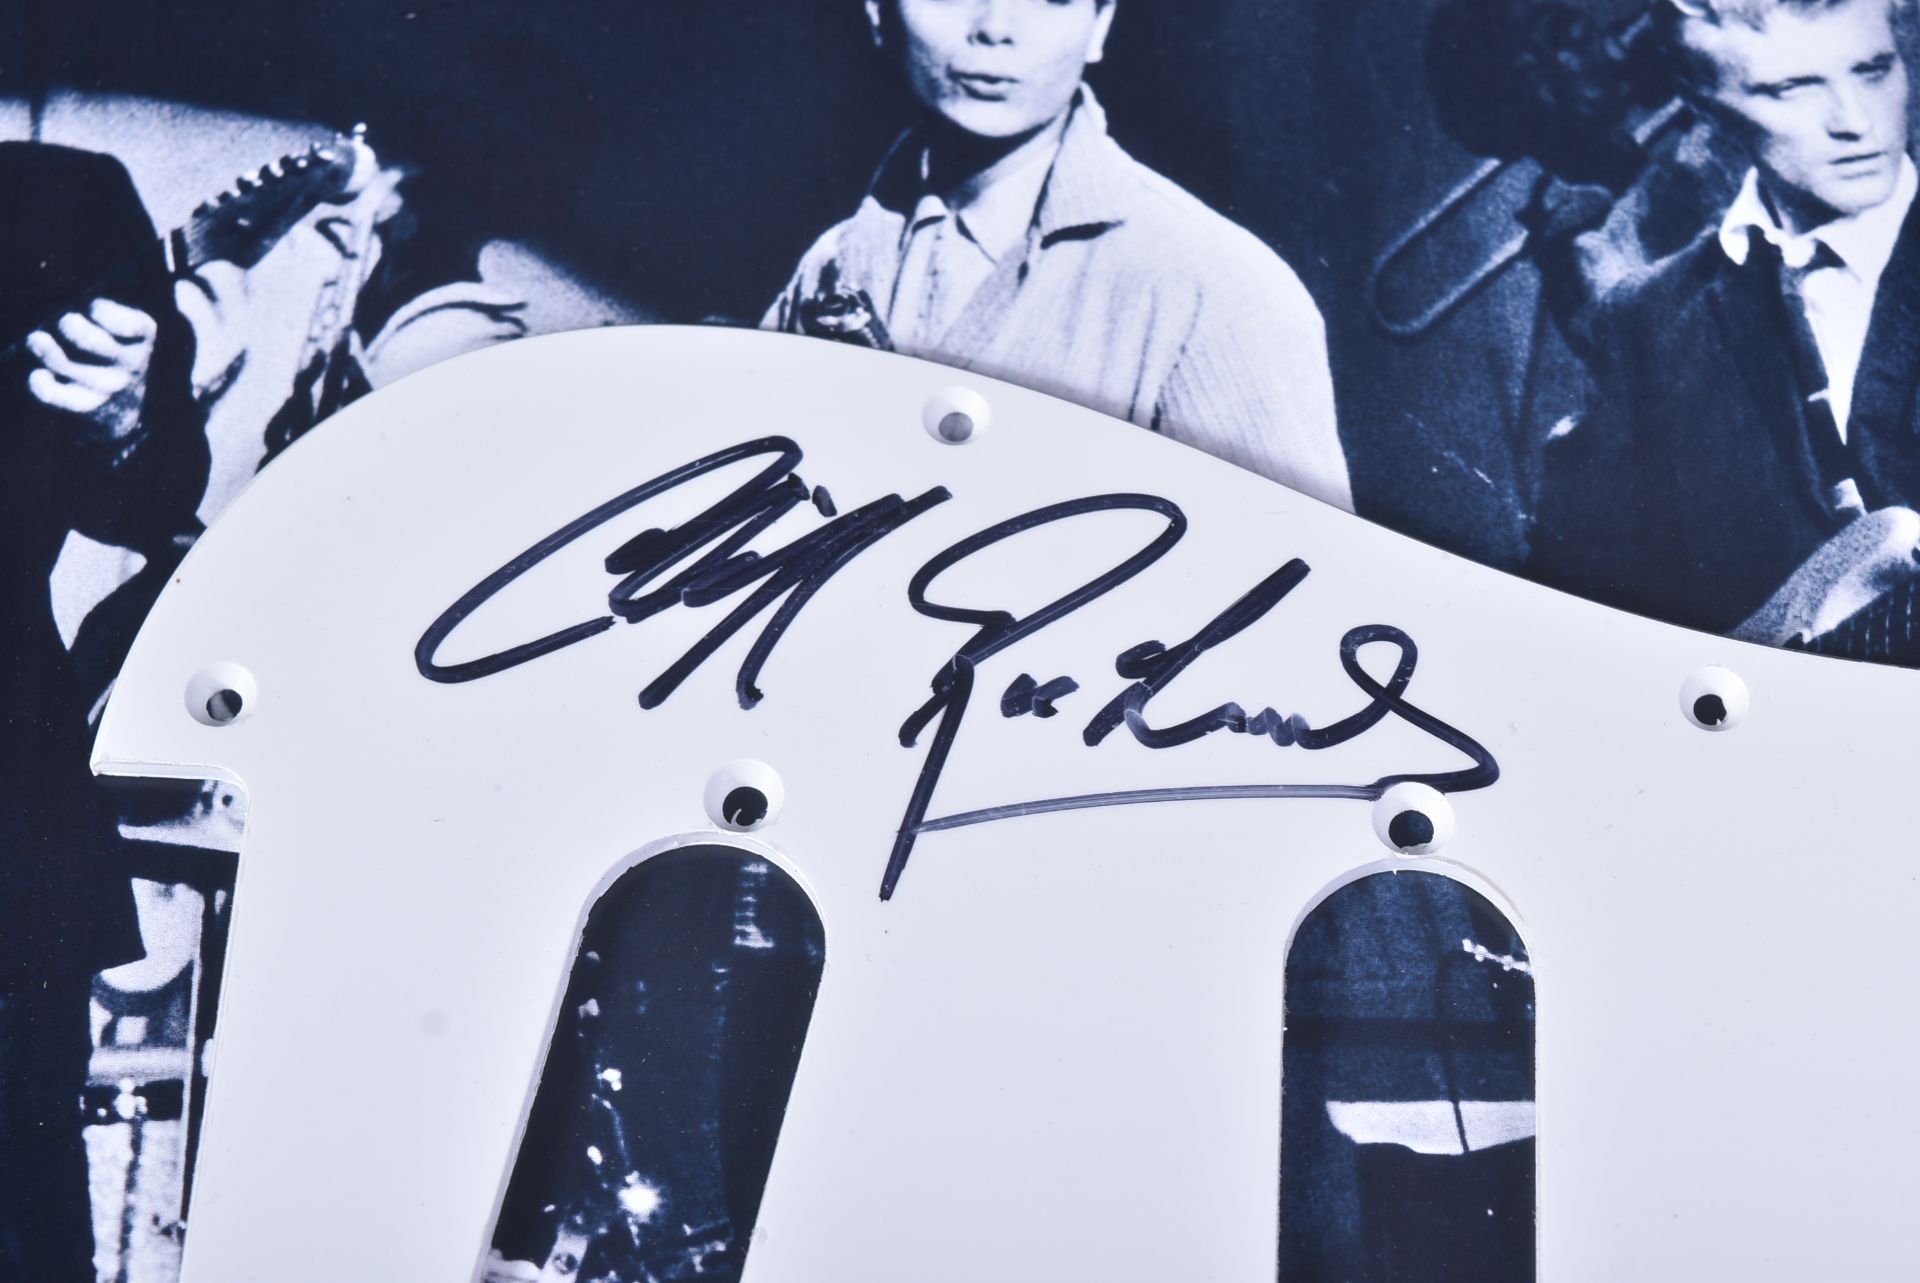 CLIFF RICHARD & THE SHADOWS - AUTOGRAPHED GUITAR PICKGUARD - Image 2 of 4